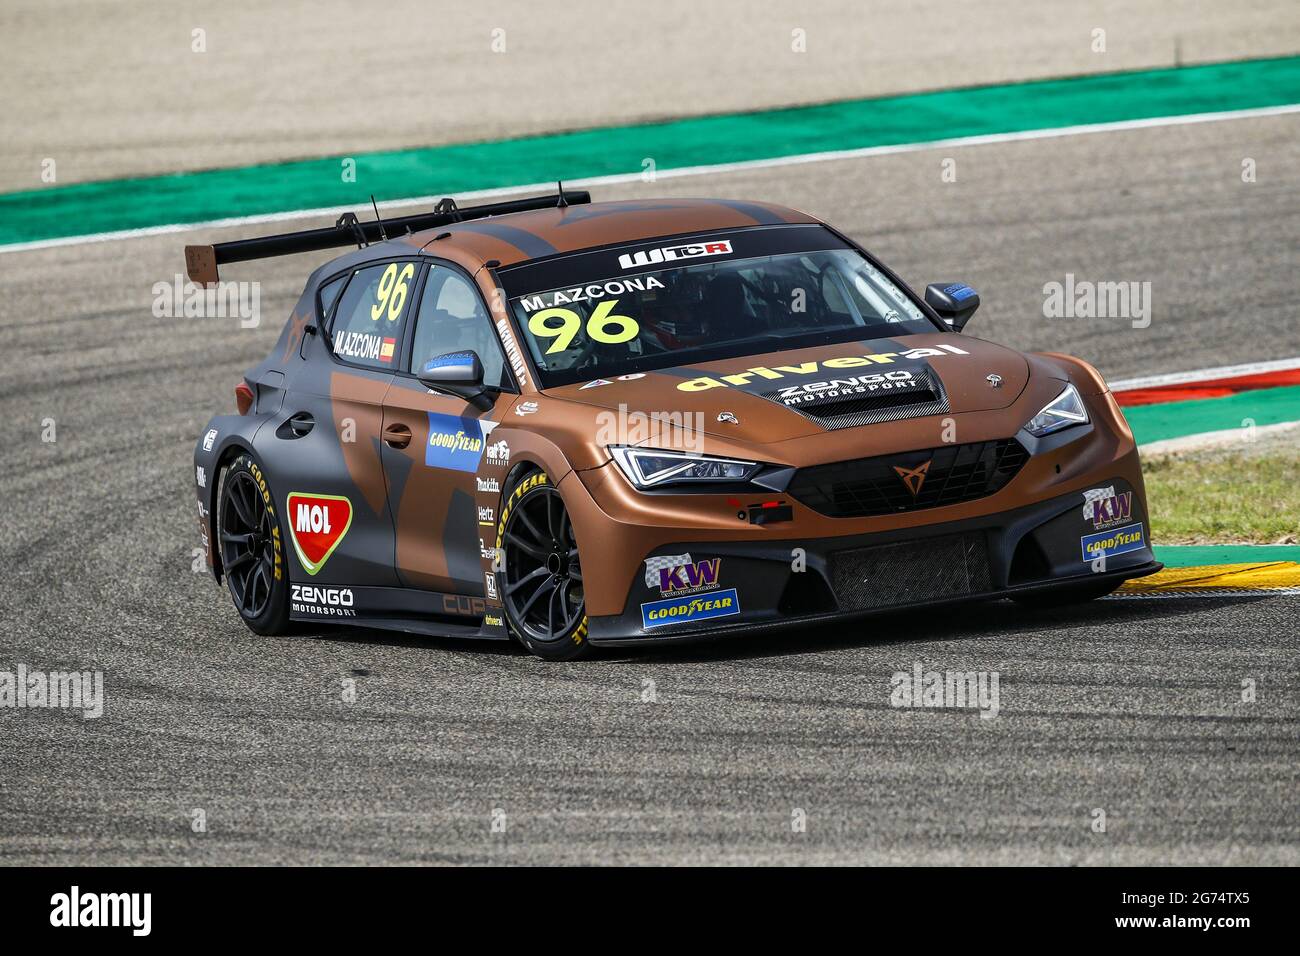 96 Azcona Mikel (spa), Zengo Motorsport, Cupa Leon Competicion TCR, action during the 2021 FIA WTCR Race of, Spain. , . FIA World Touring Car Cup, on the Ciudad del Motor de Aragon, from July 10 to 11, 2021 in Alcaniz, Spain - Photo Xavi Bonilla/DPPI Credit: Independent Photo Agency/Alamy Live News Stock Photo